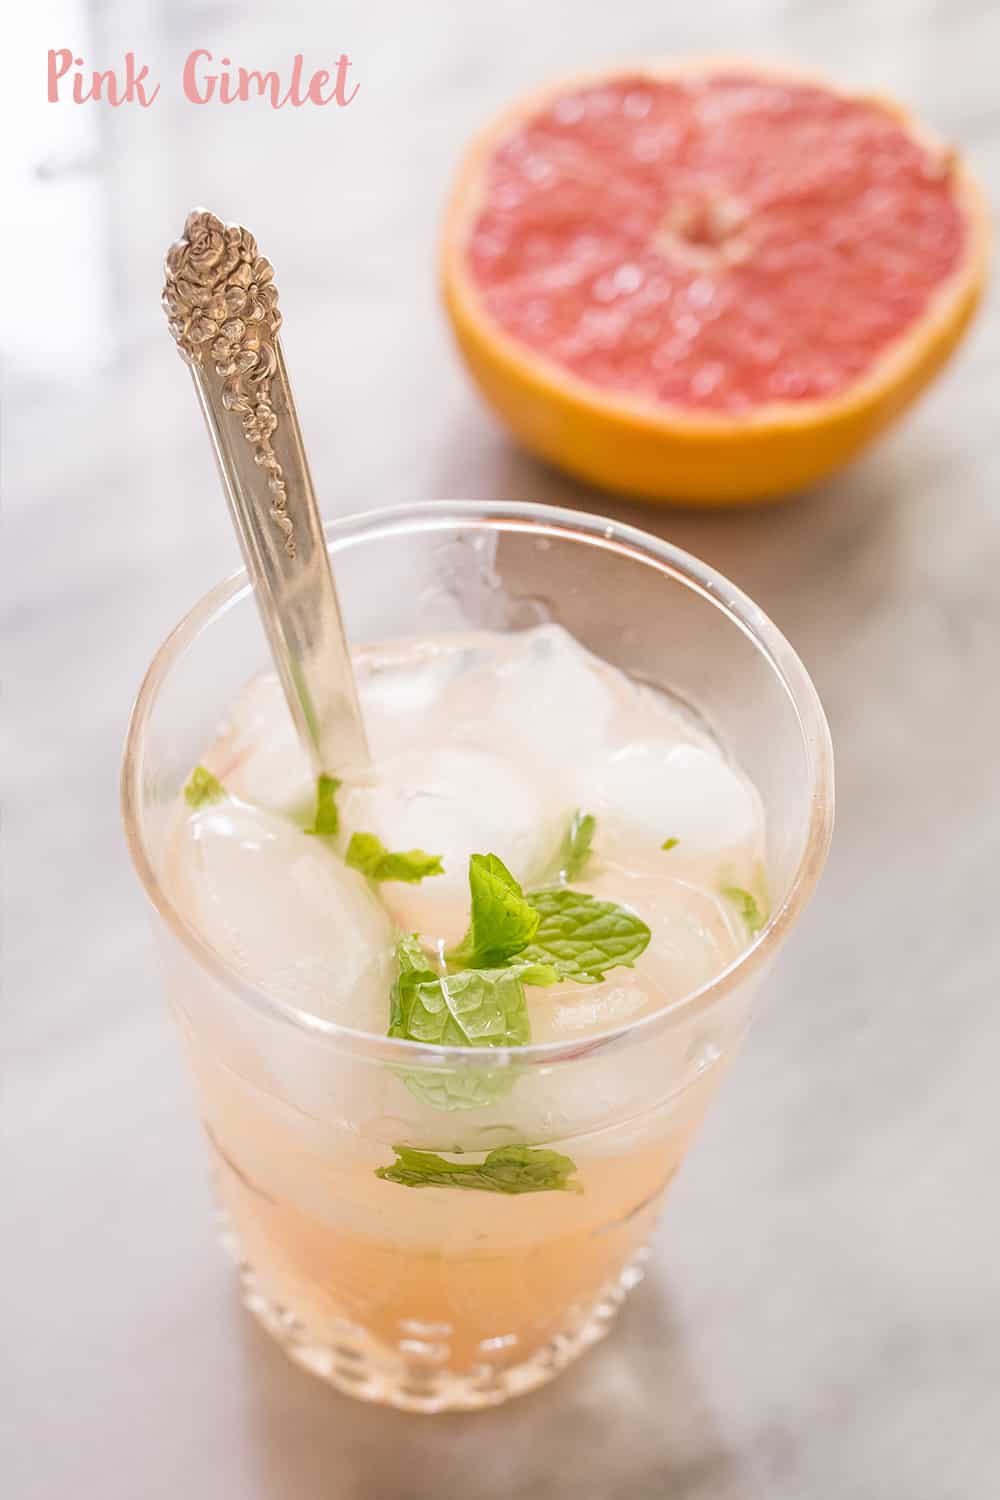 Pink Gimlet- this delicious gimlet is dressed up with a dash of grapefruit and mint for a refreshing, delicious cocktail!